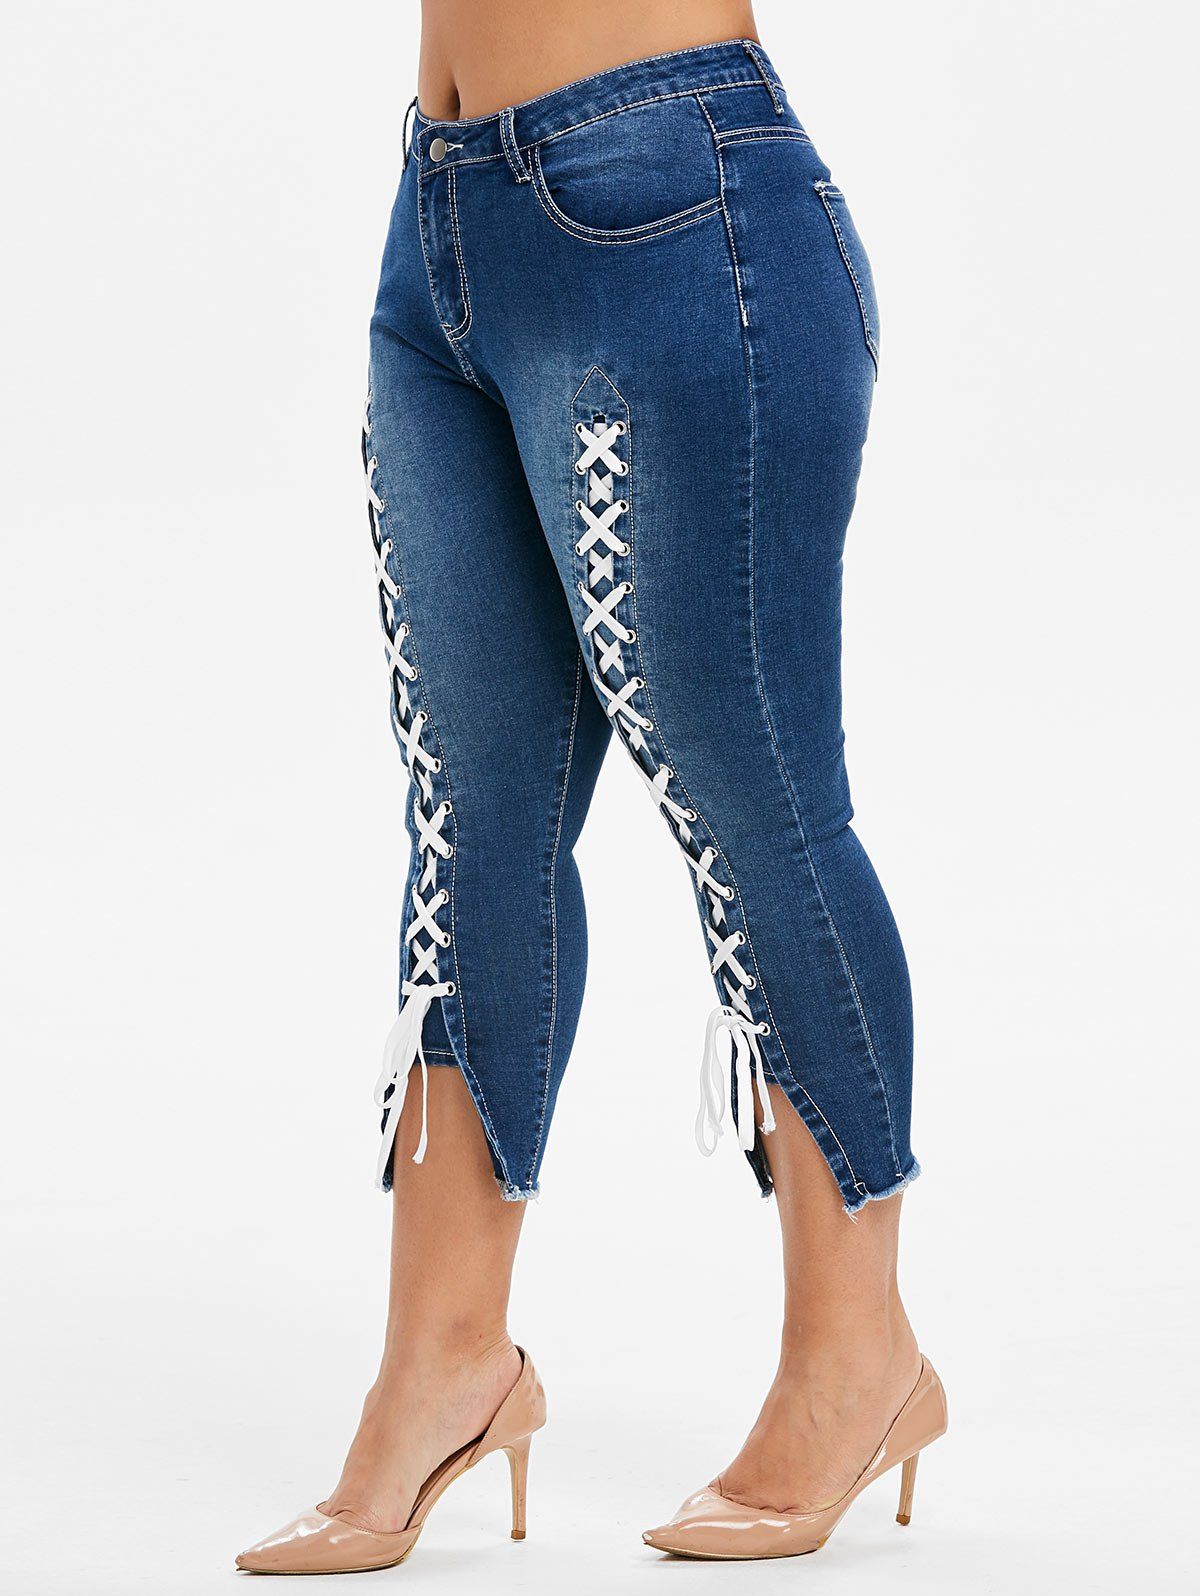 Plus Size Lace Up Capri Frayed Jeans [49% OFF] | Rosegal